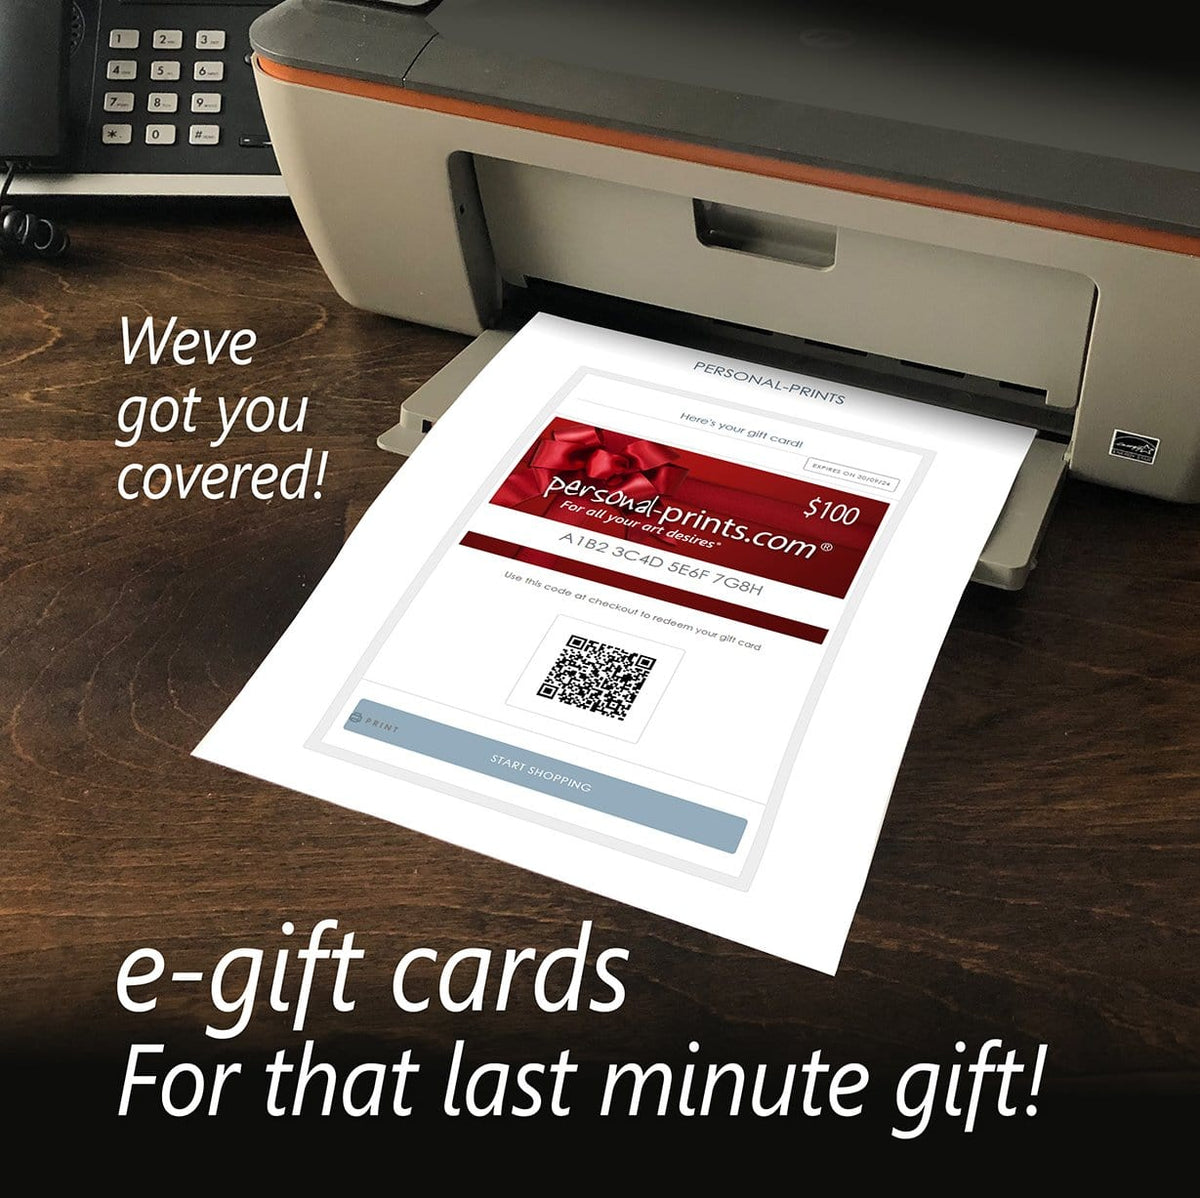 Emailed to you and easy to print for last minute personalized gifts